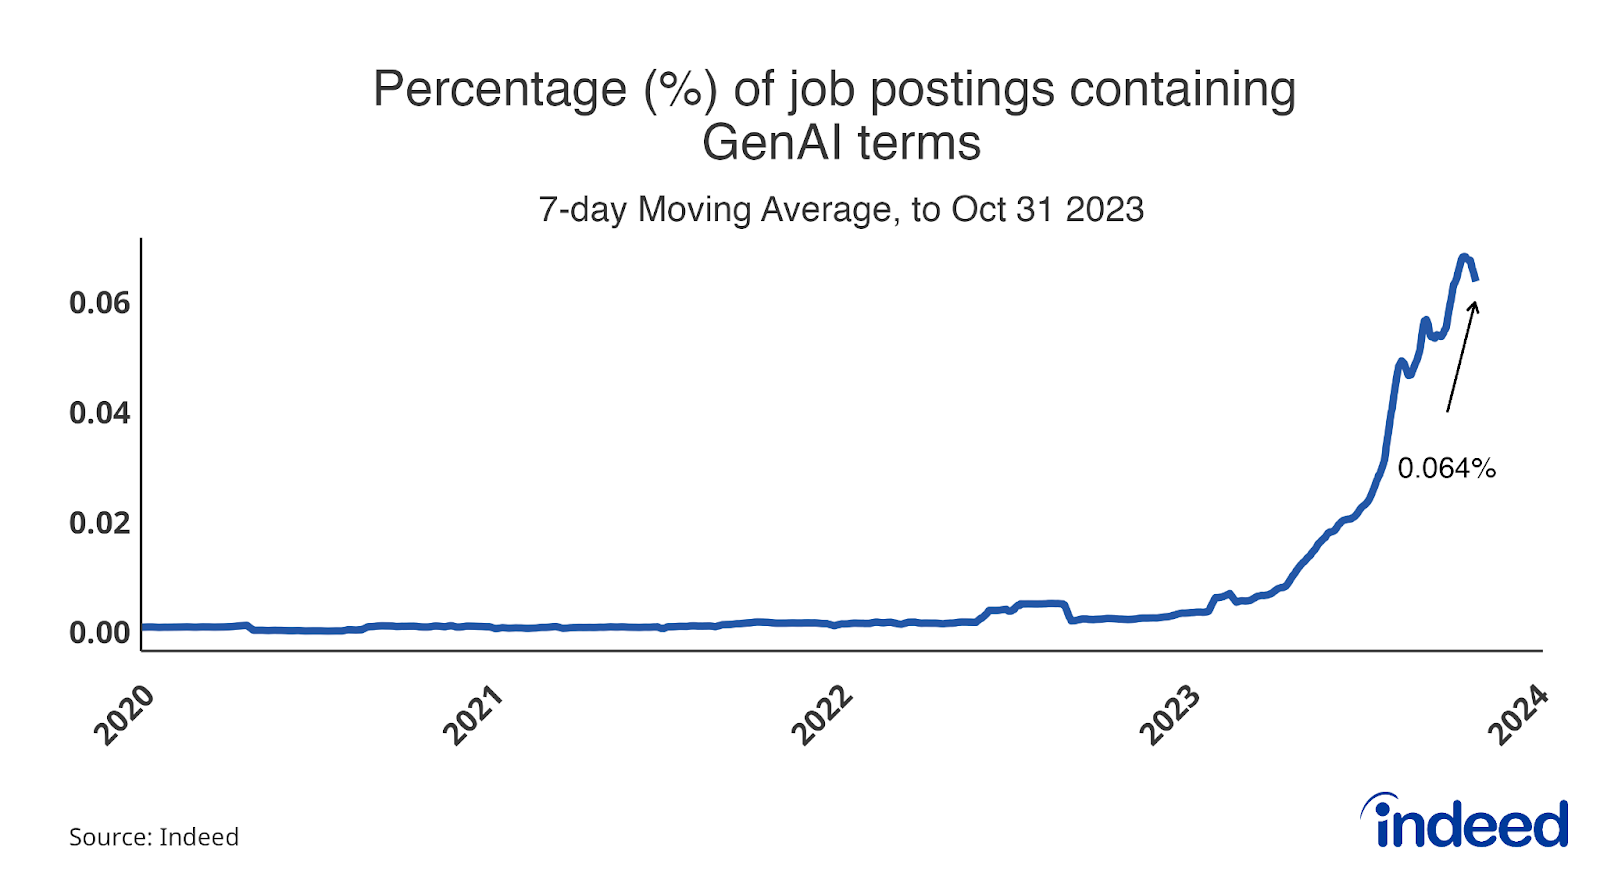 Line graph titled “Percentage (%) of job postings containing GenAI terms.” With a vertical axis ranging from 0.00 to 0.06, and a horizontal axis ranging from January 2020 to October 2023, the graph shows the percentage of job postings containing GenAI terms, and the recent rise of that percentage.